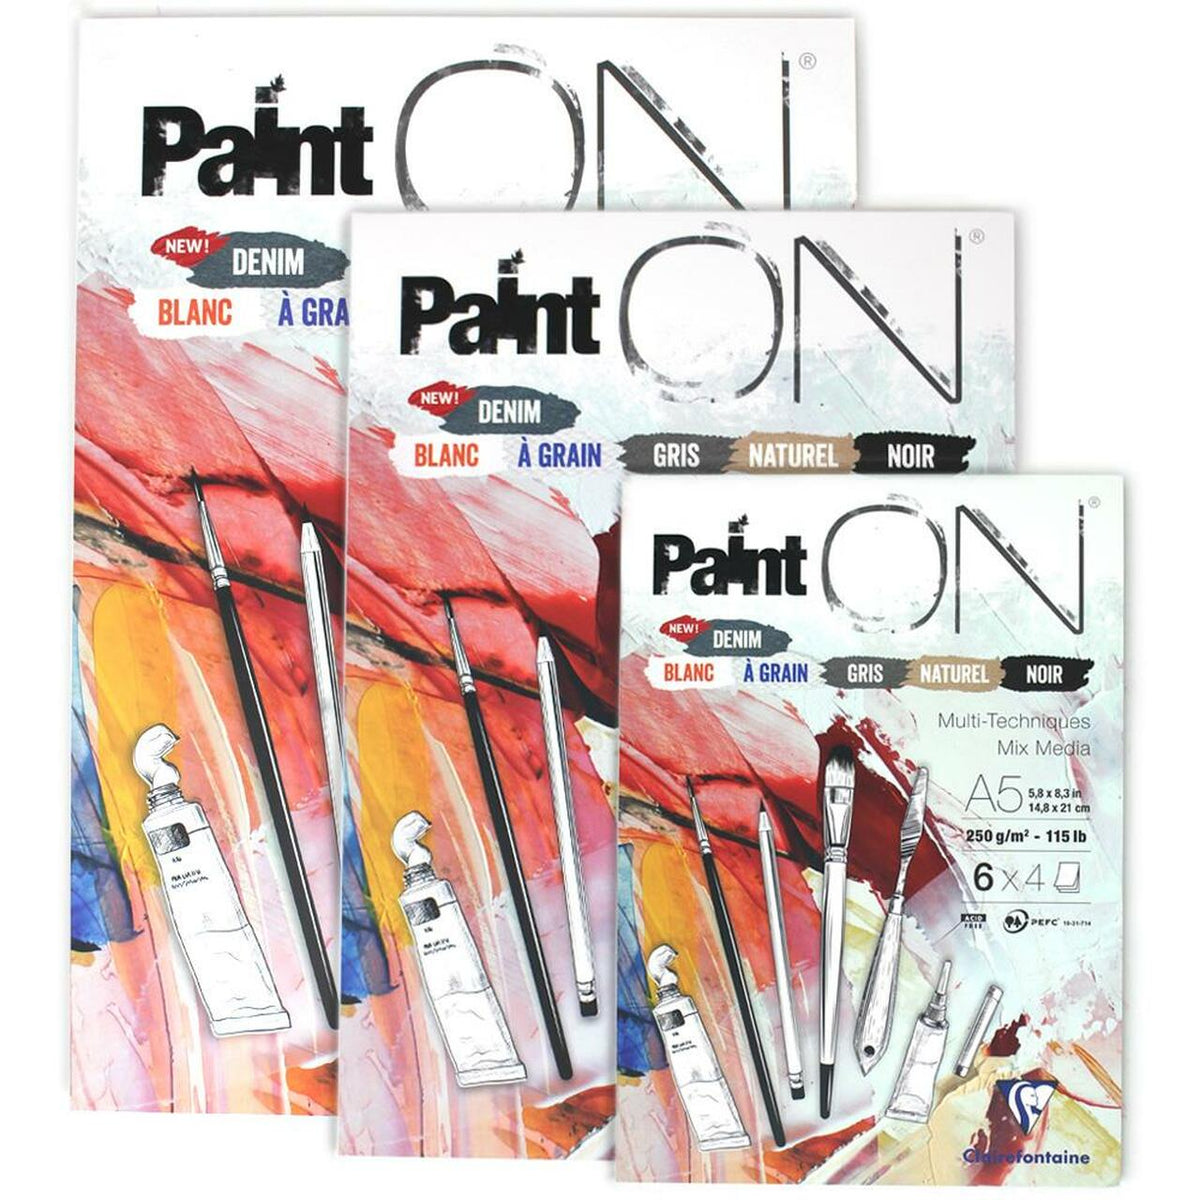 Clairefontaine PaintON NATURAL Mixed Media Pad A5 10 Sheets 250g 115lb Art  Paper